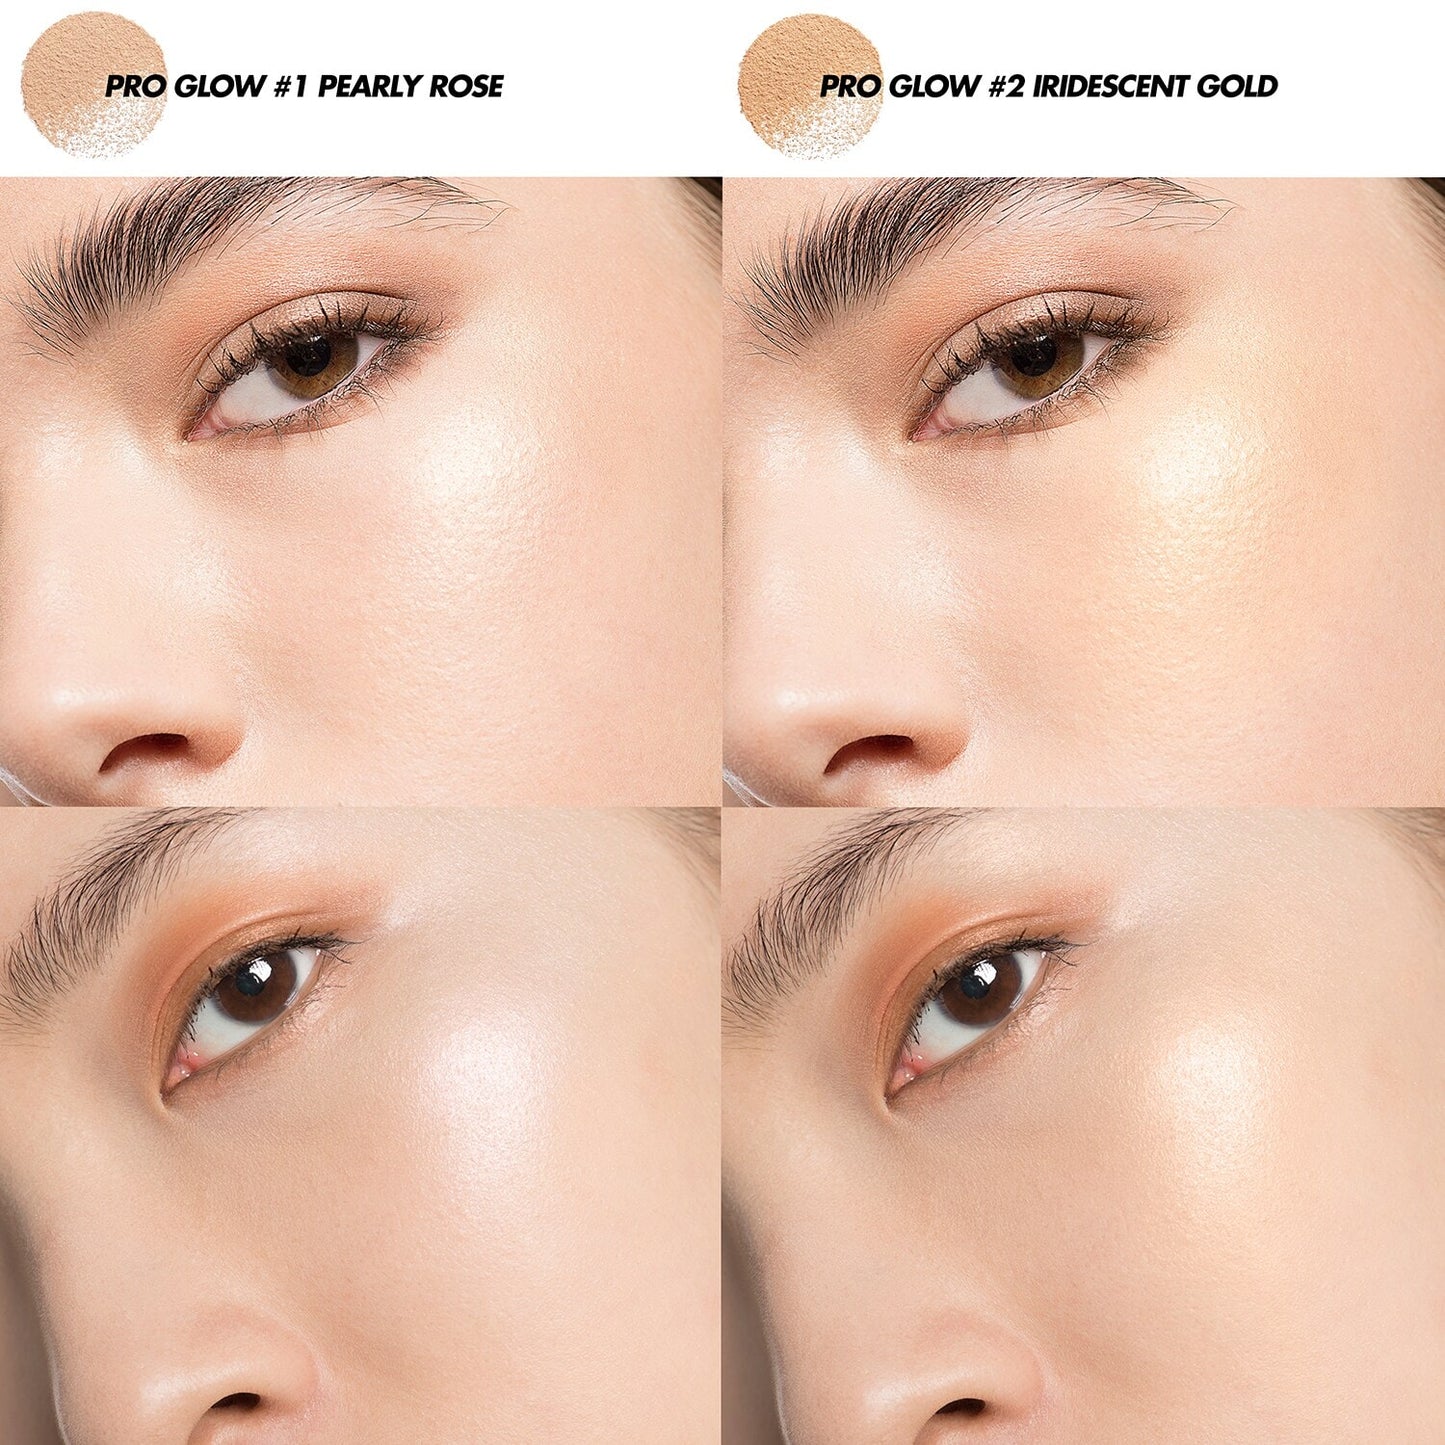 MAKE UP FOR EVER - Pro Glow pressed Highlighter | 9 g